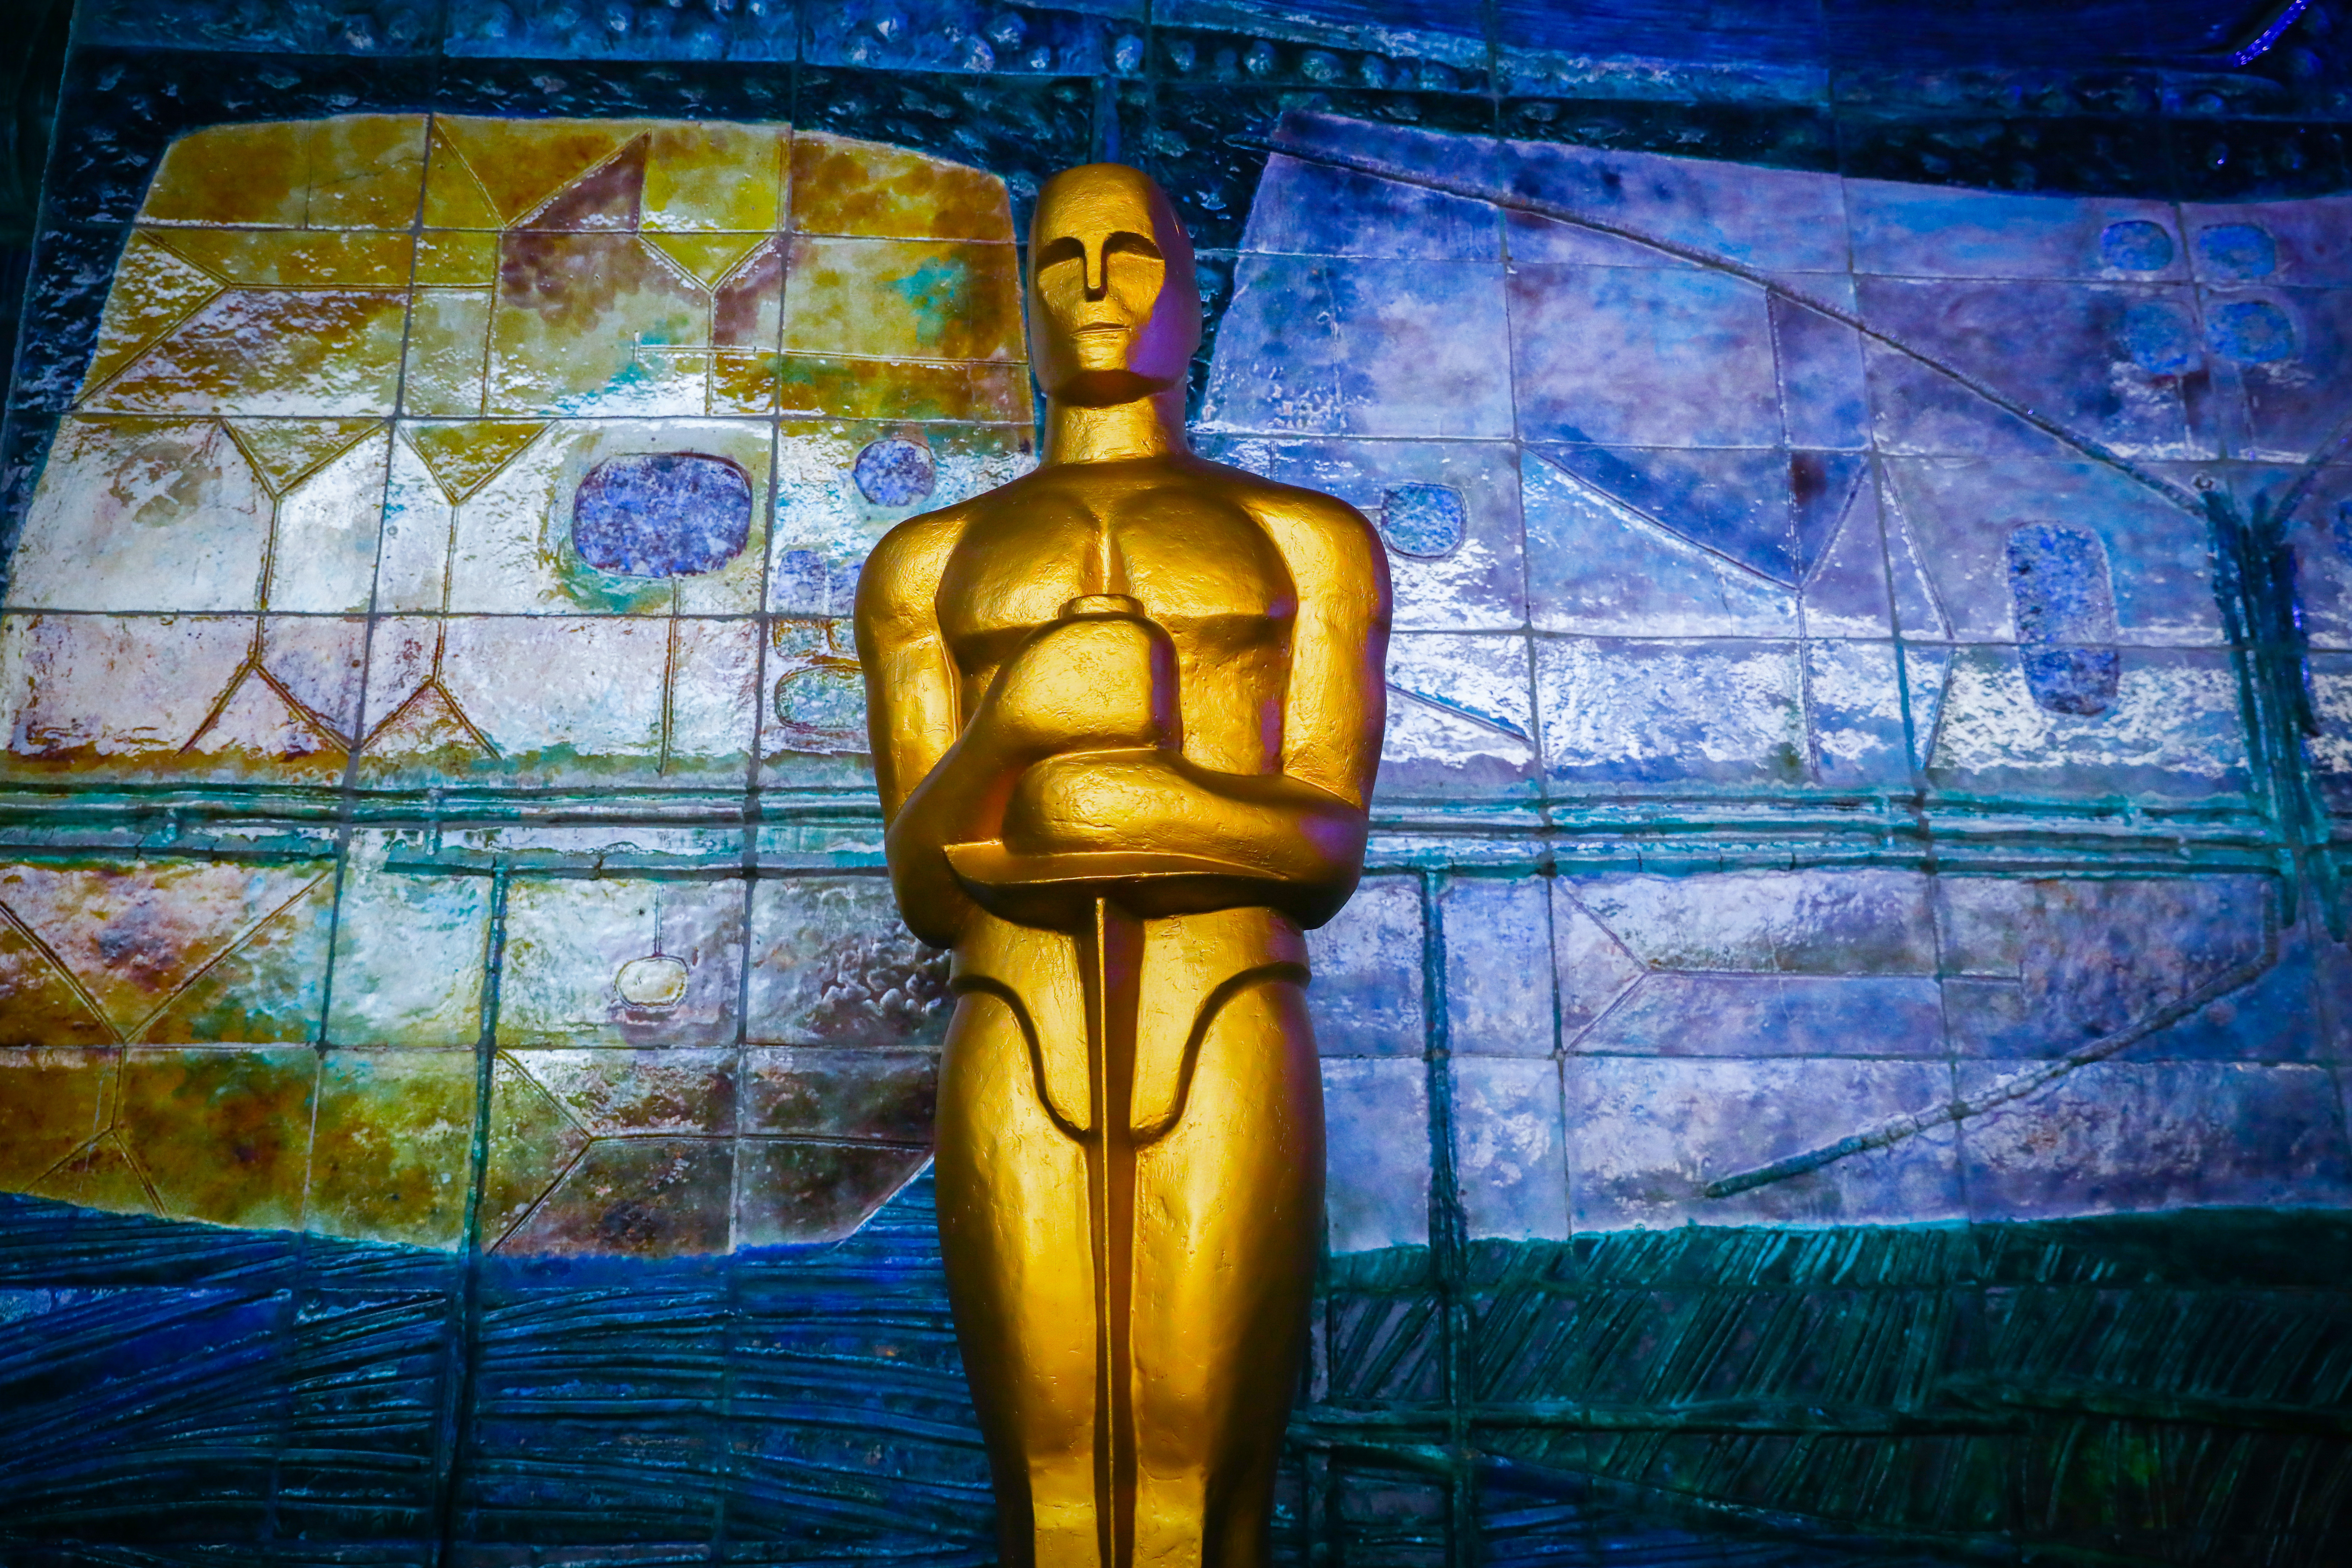 An Oscar statue in front of a colorful background.